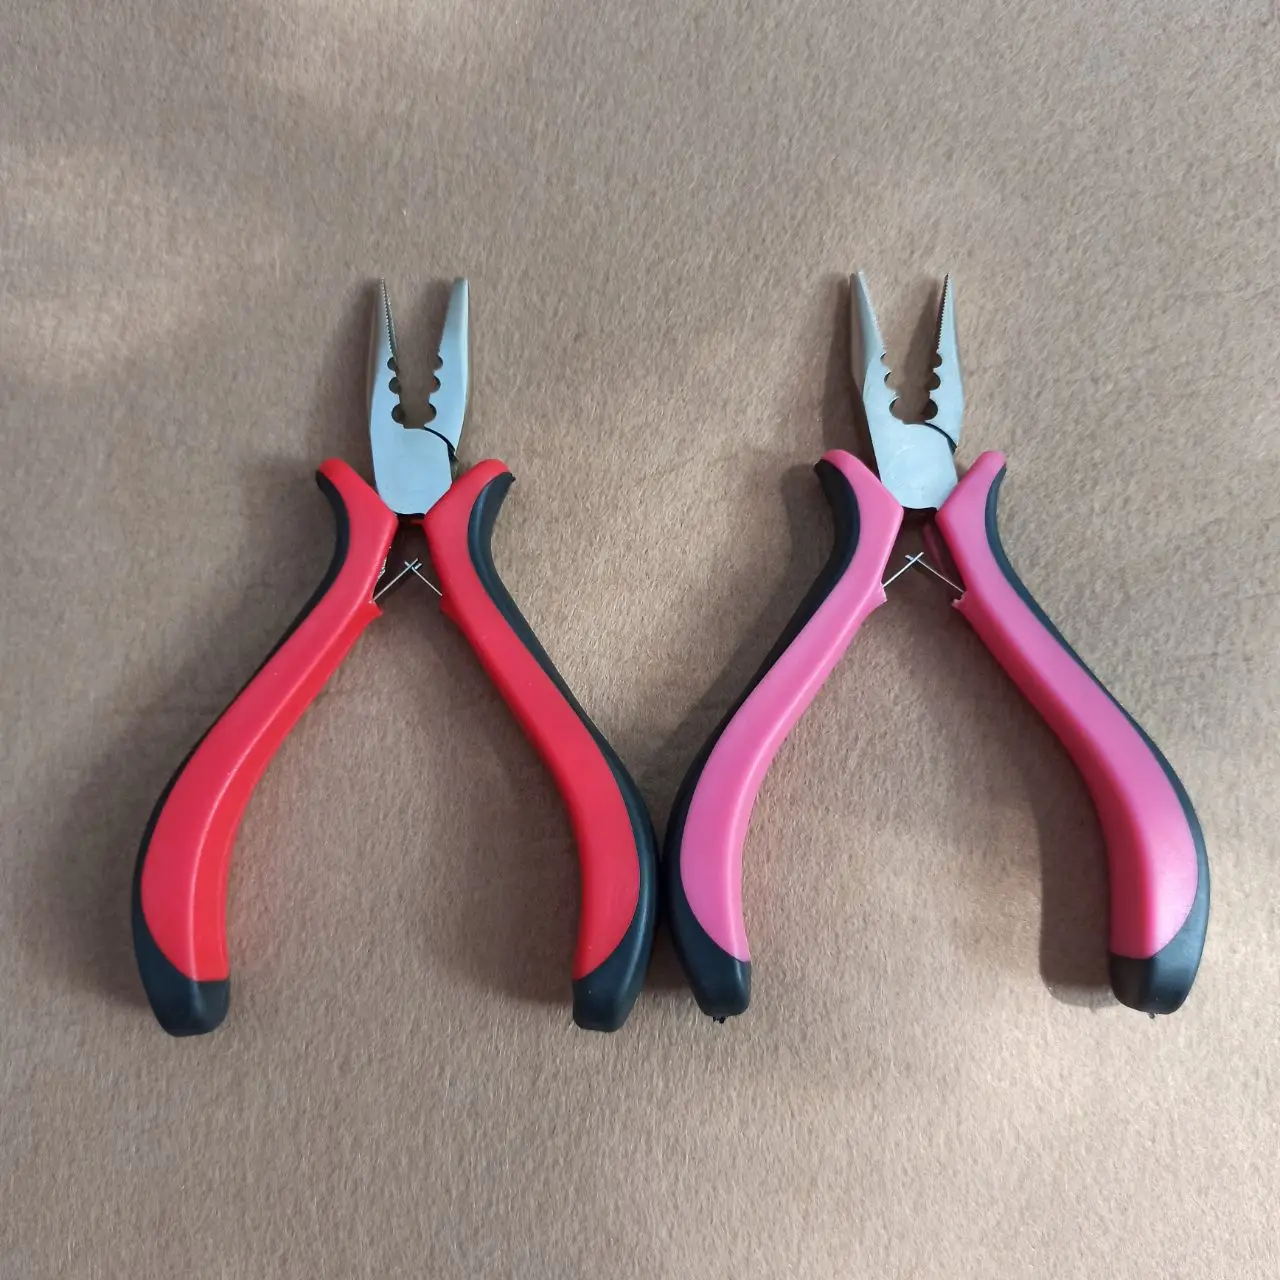 
hair extension micro rings beads links plier tools 